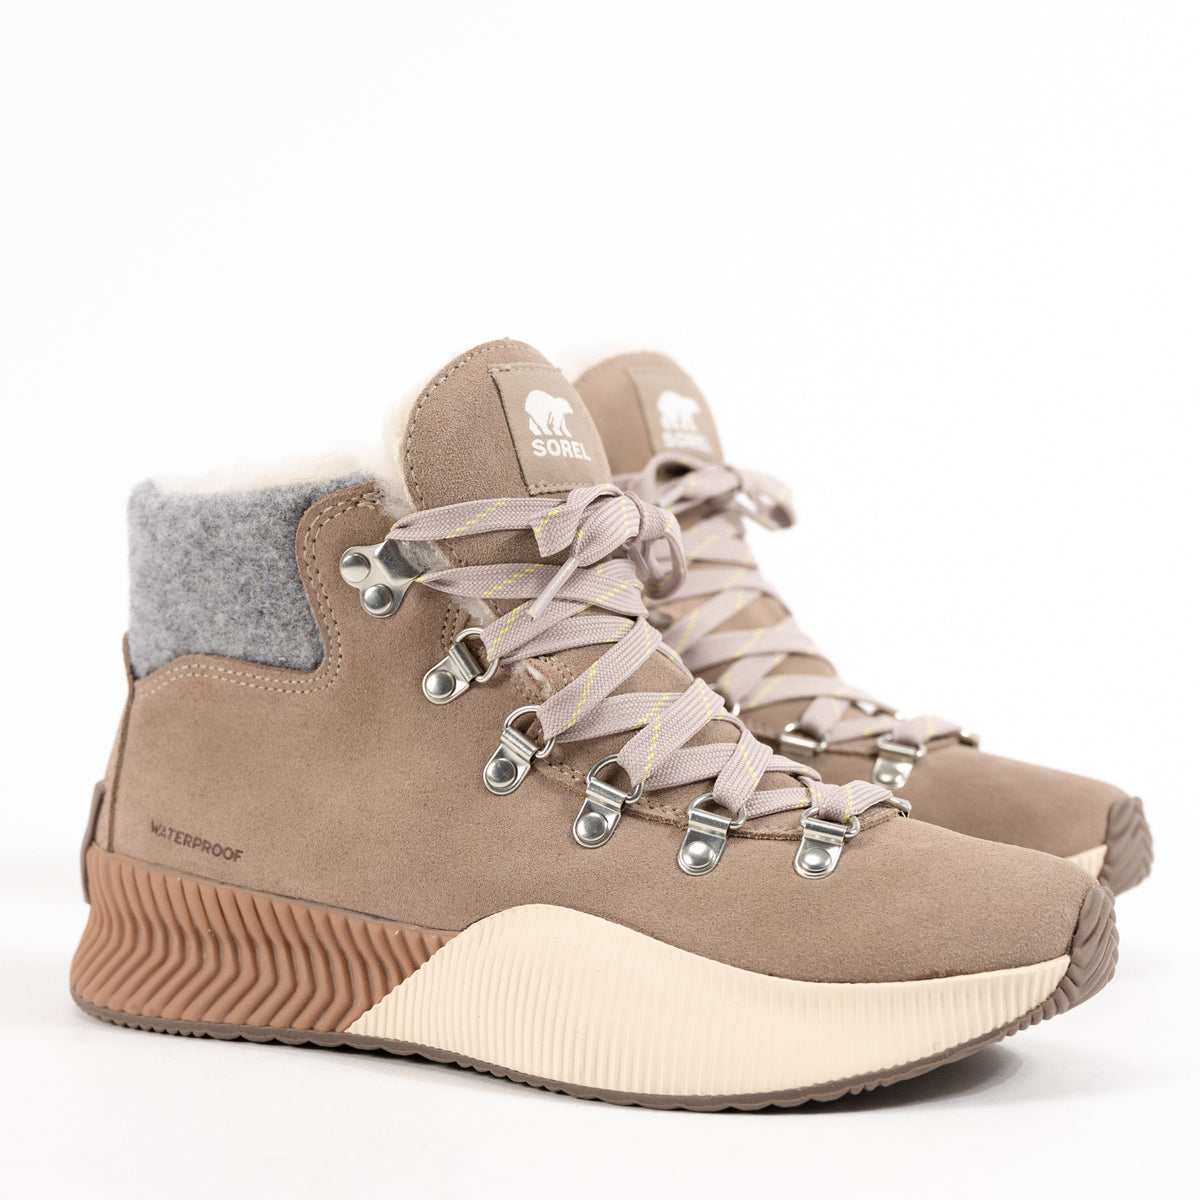 OUT 'N ABOUT III CONQUEST - OMEGA TAUPE - NUBUCK